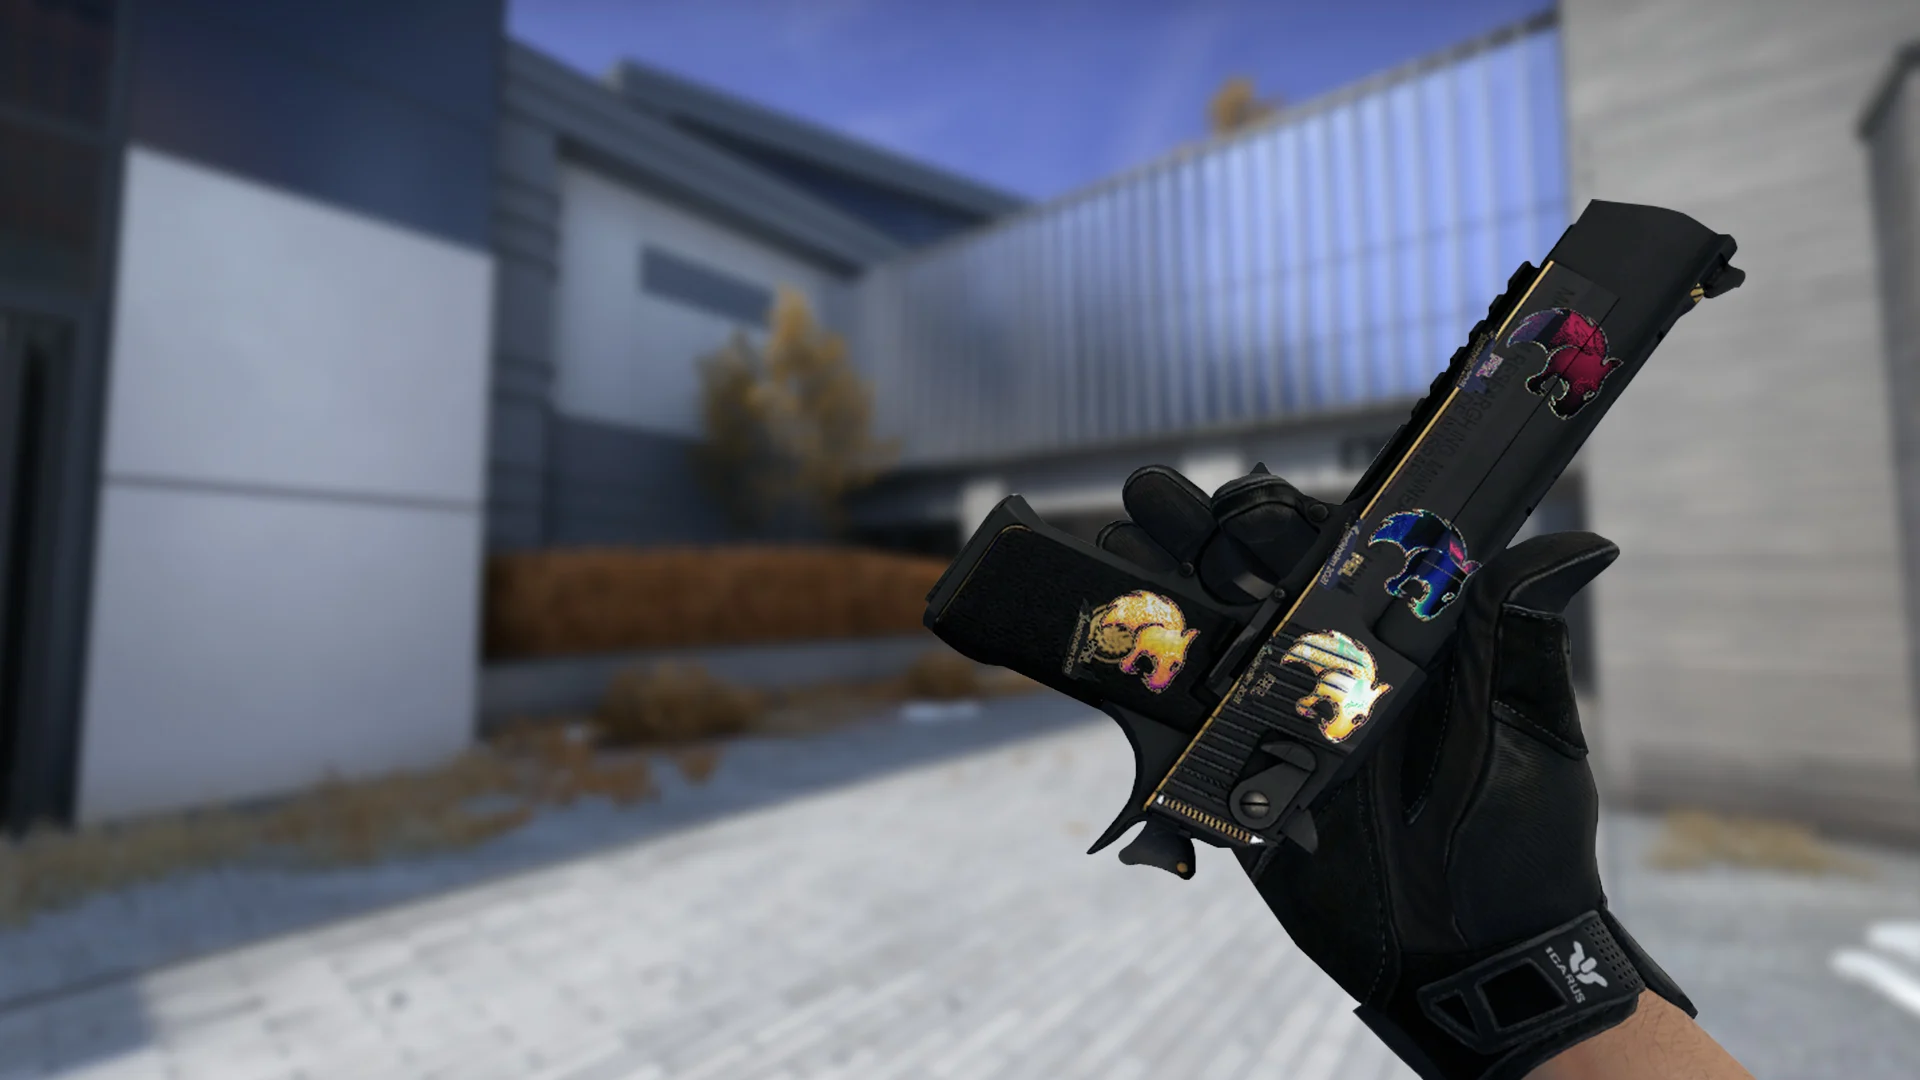 The 10 Most Expensive CS:GO Stickers - Skinport Blog